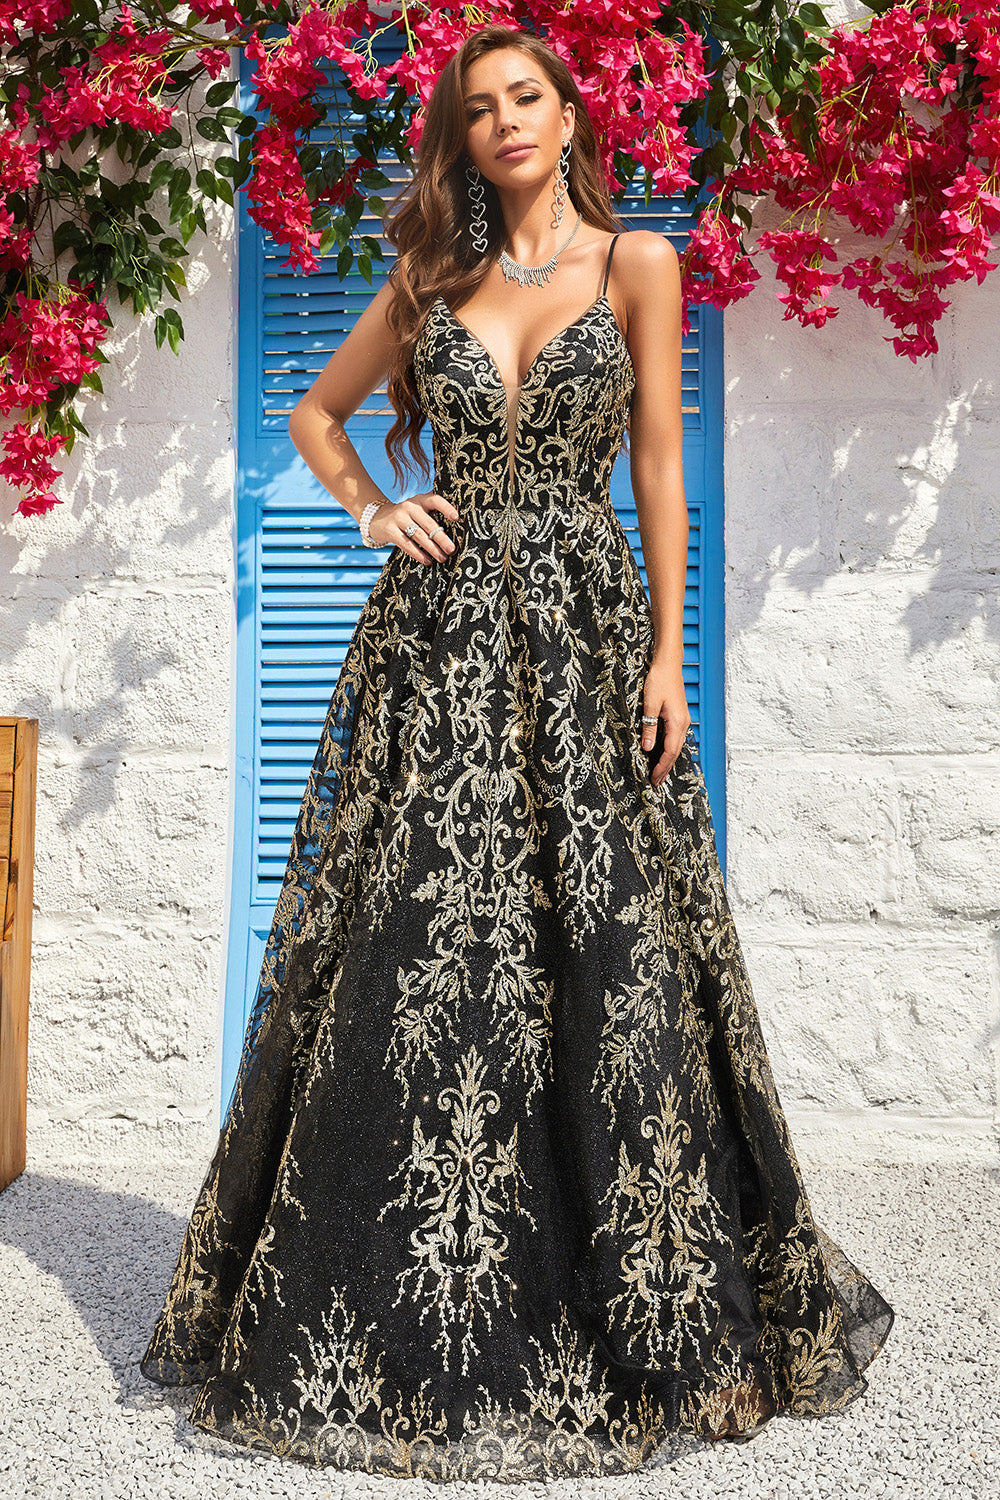 Spaghetti Straps Sparkly Black Golden Ball Gown Dress with Bronzing